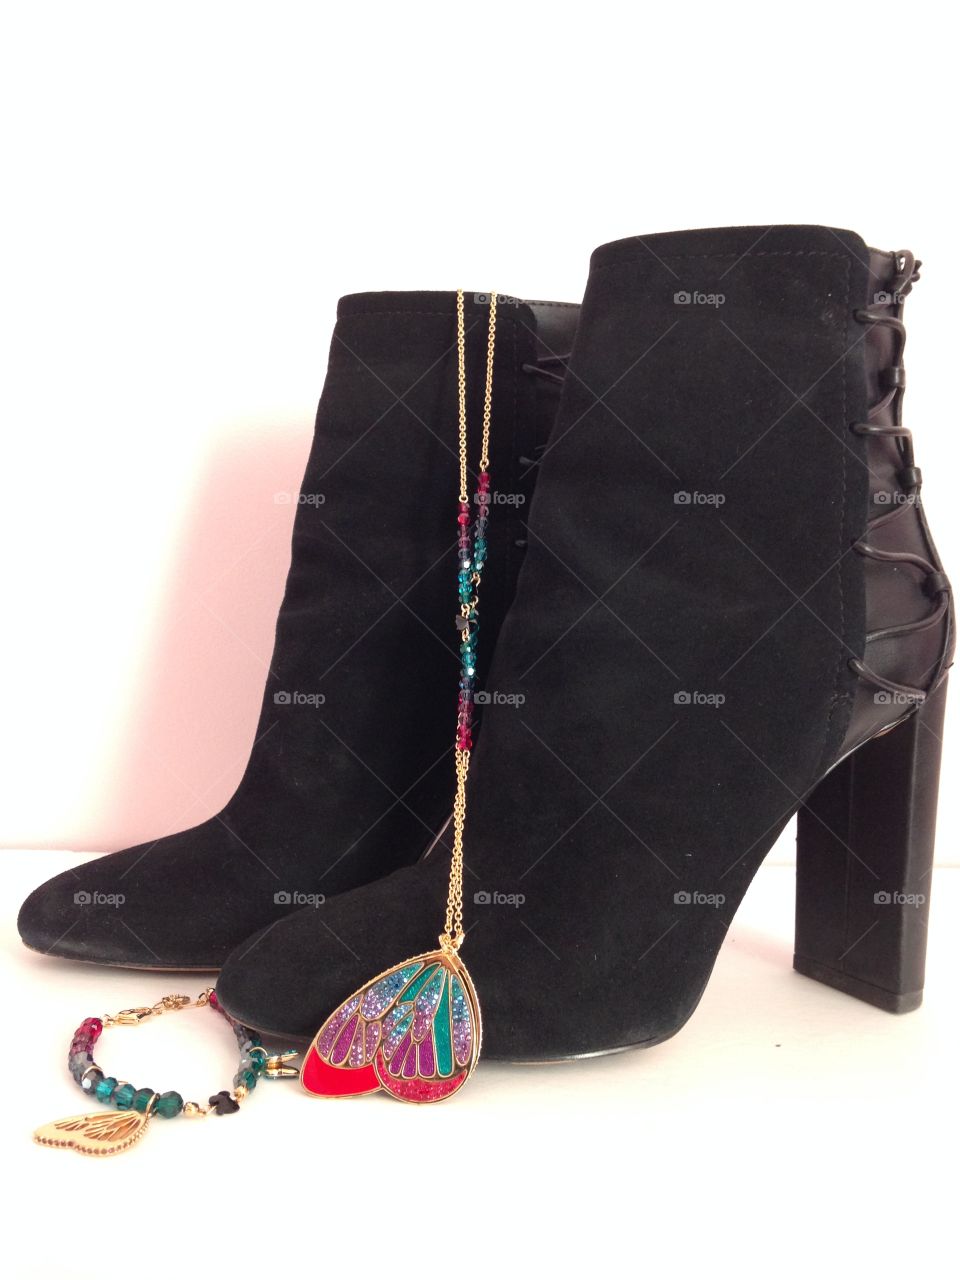 Black boot with jewelry